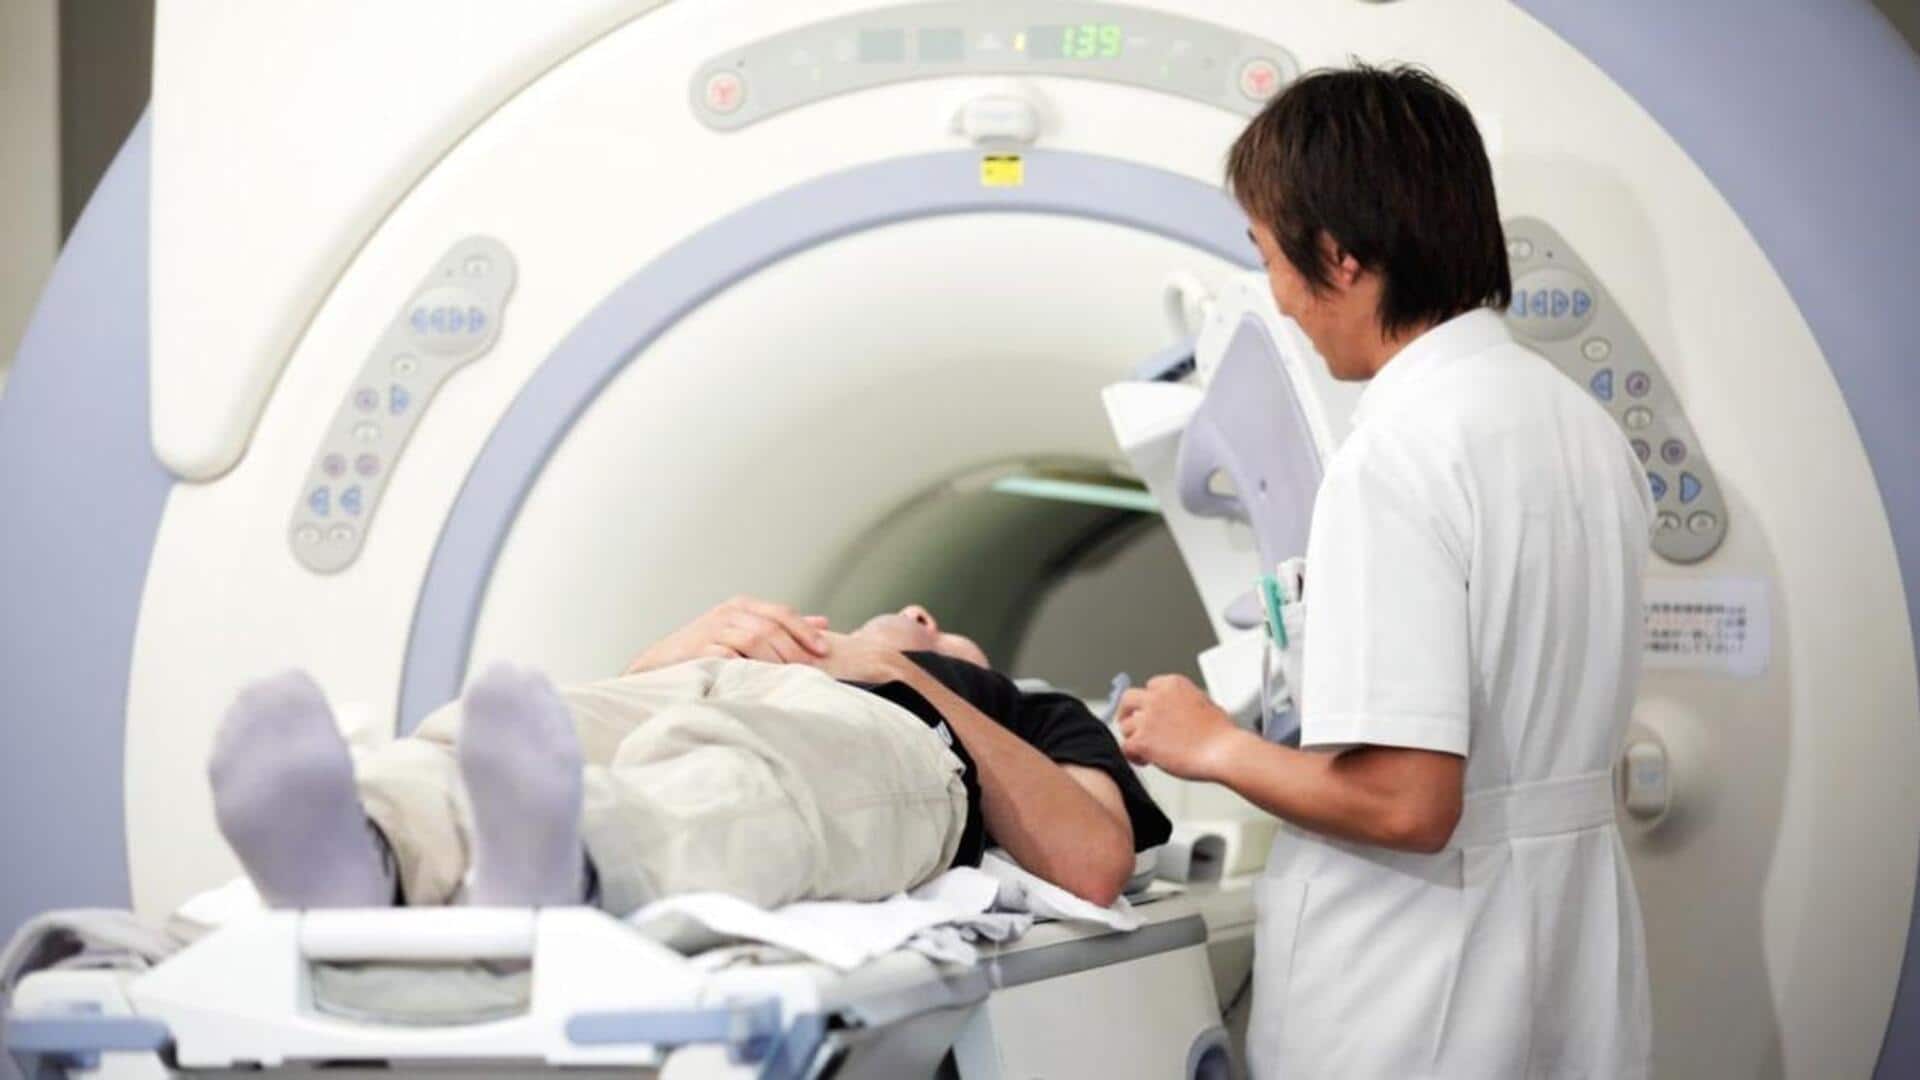 Chinese nuclear scientists develop X-ray machine for cancer treatment